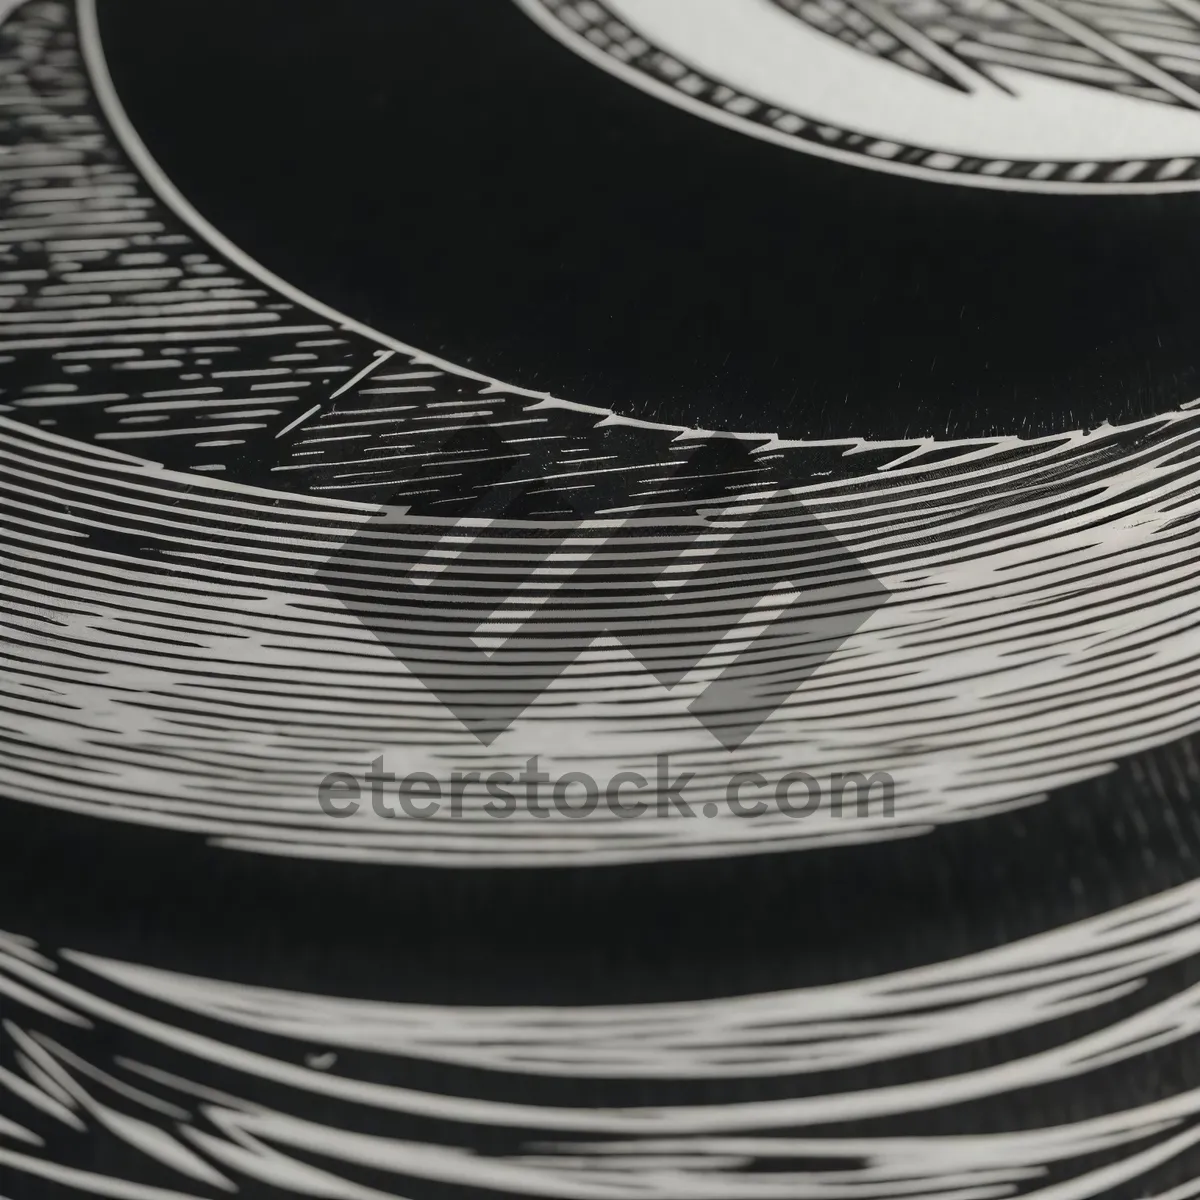 Picture of Vintage Reel on Phonograph Record: Analog Meets Digital